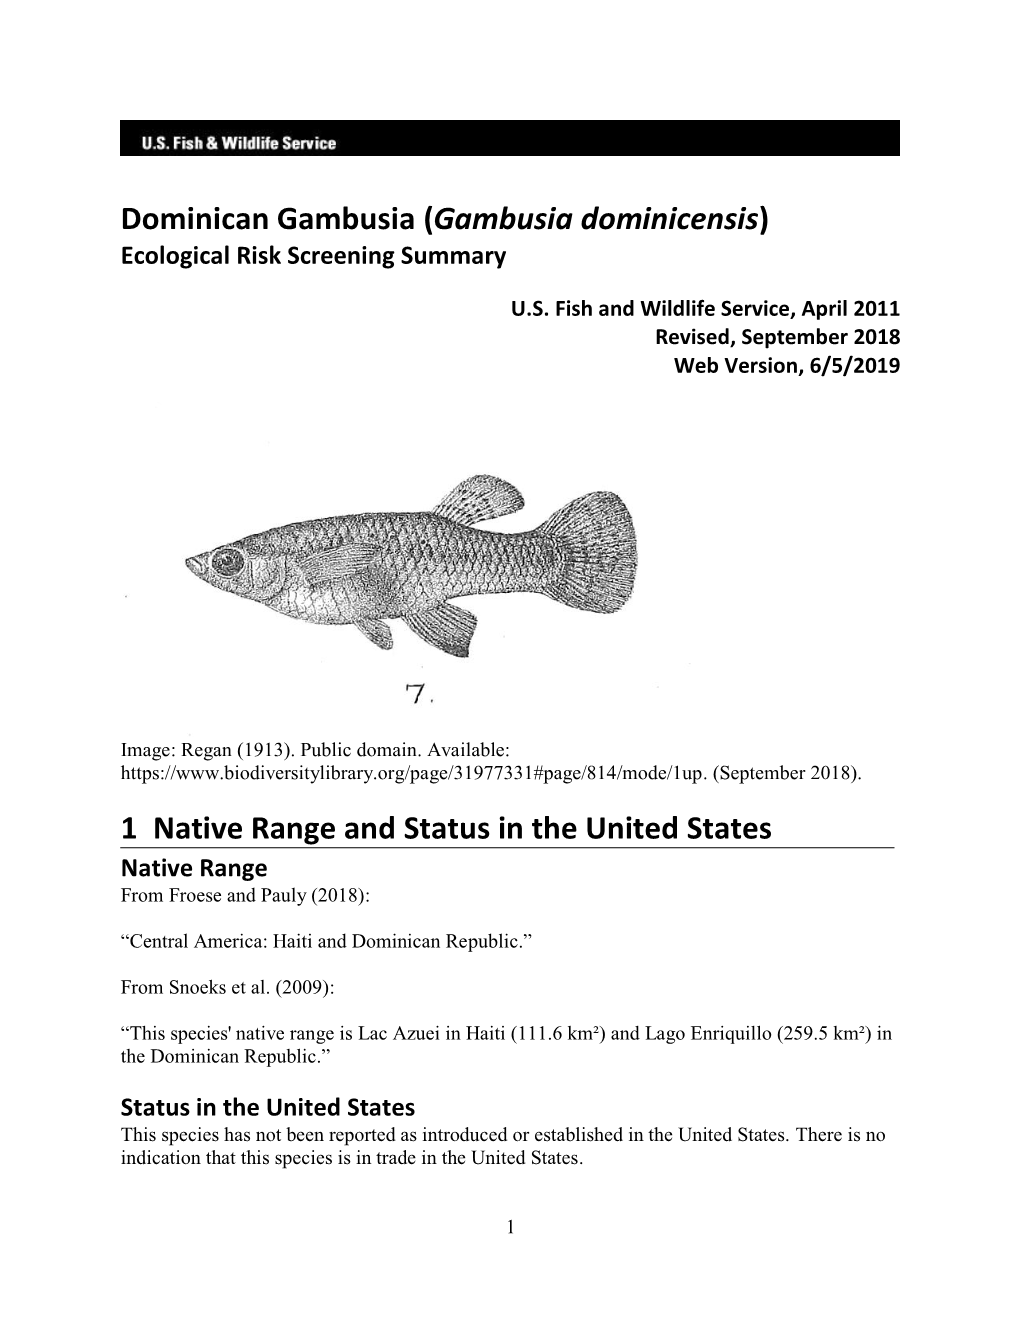 Gambusia Dominicensis) Ecological Risk Screening Summary